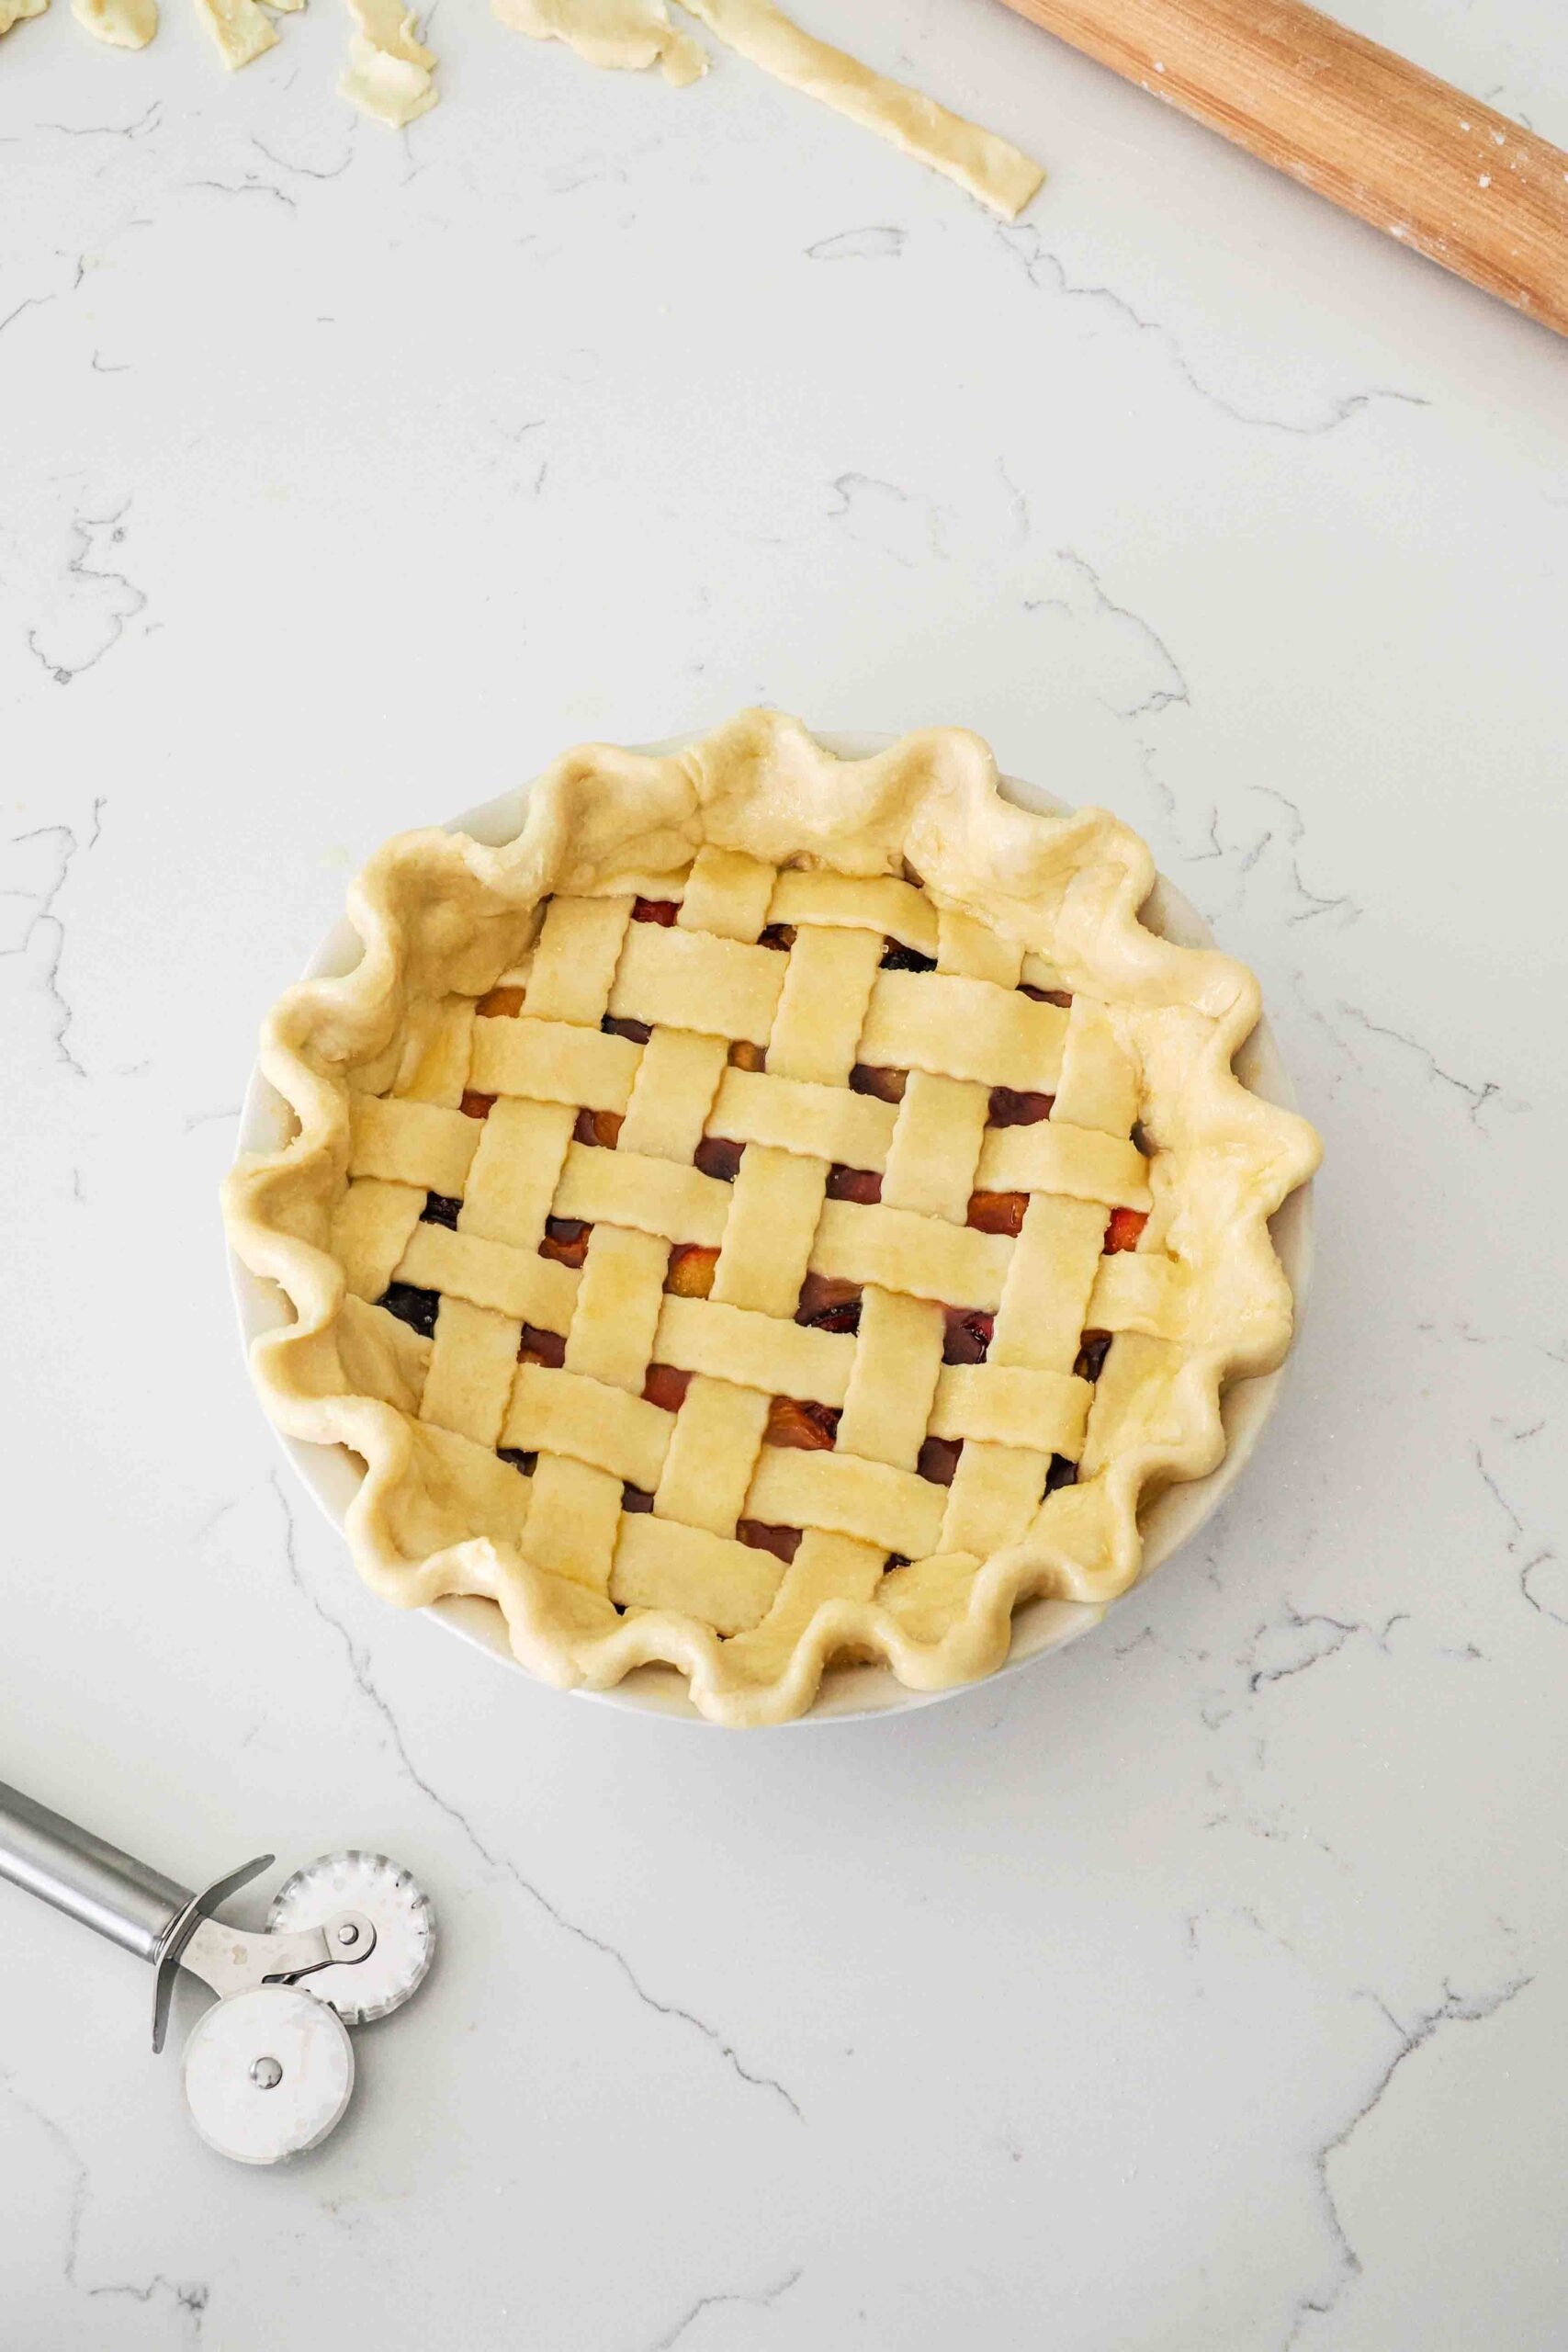 An unbaked cherry pie ready to bake.